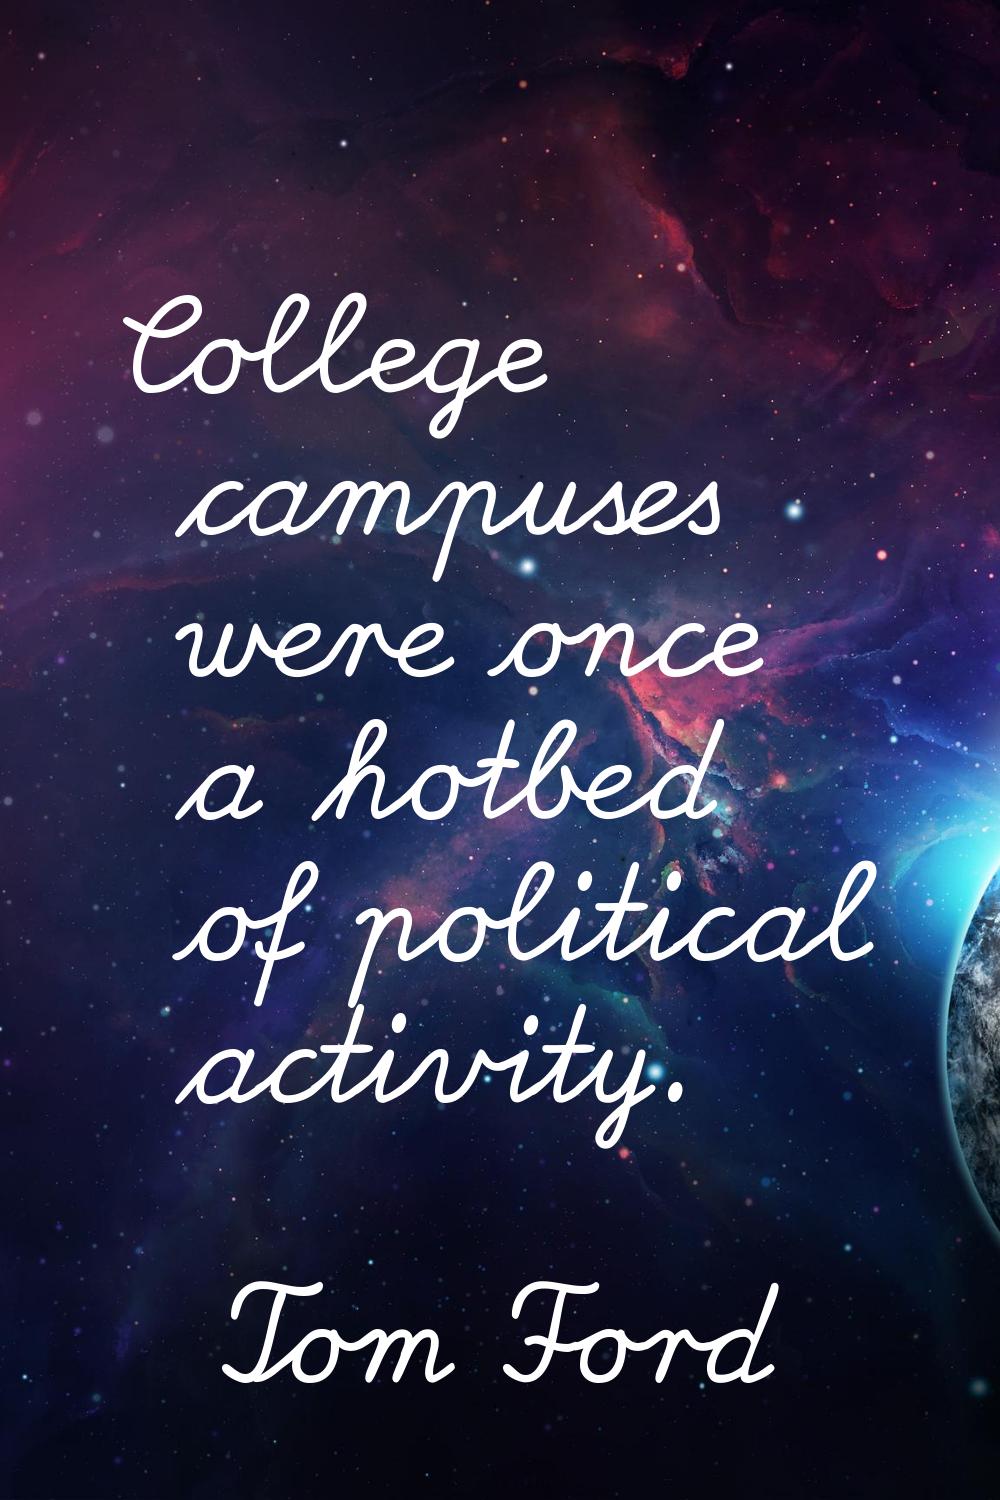 College campuses were once a hotbed of political activity.